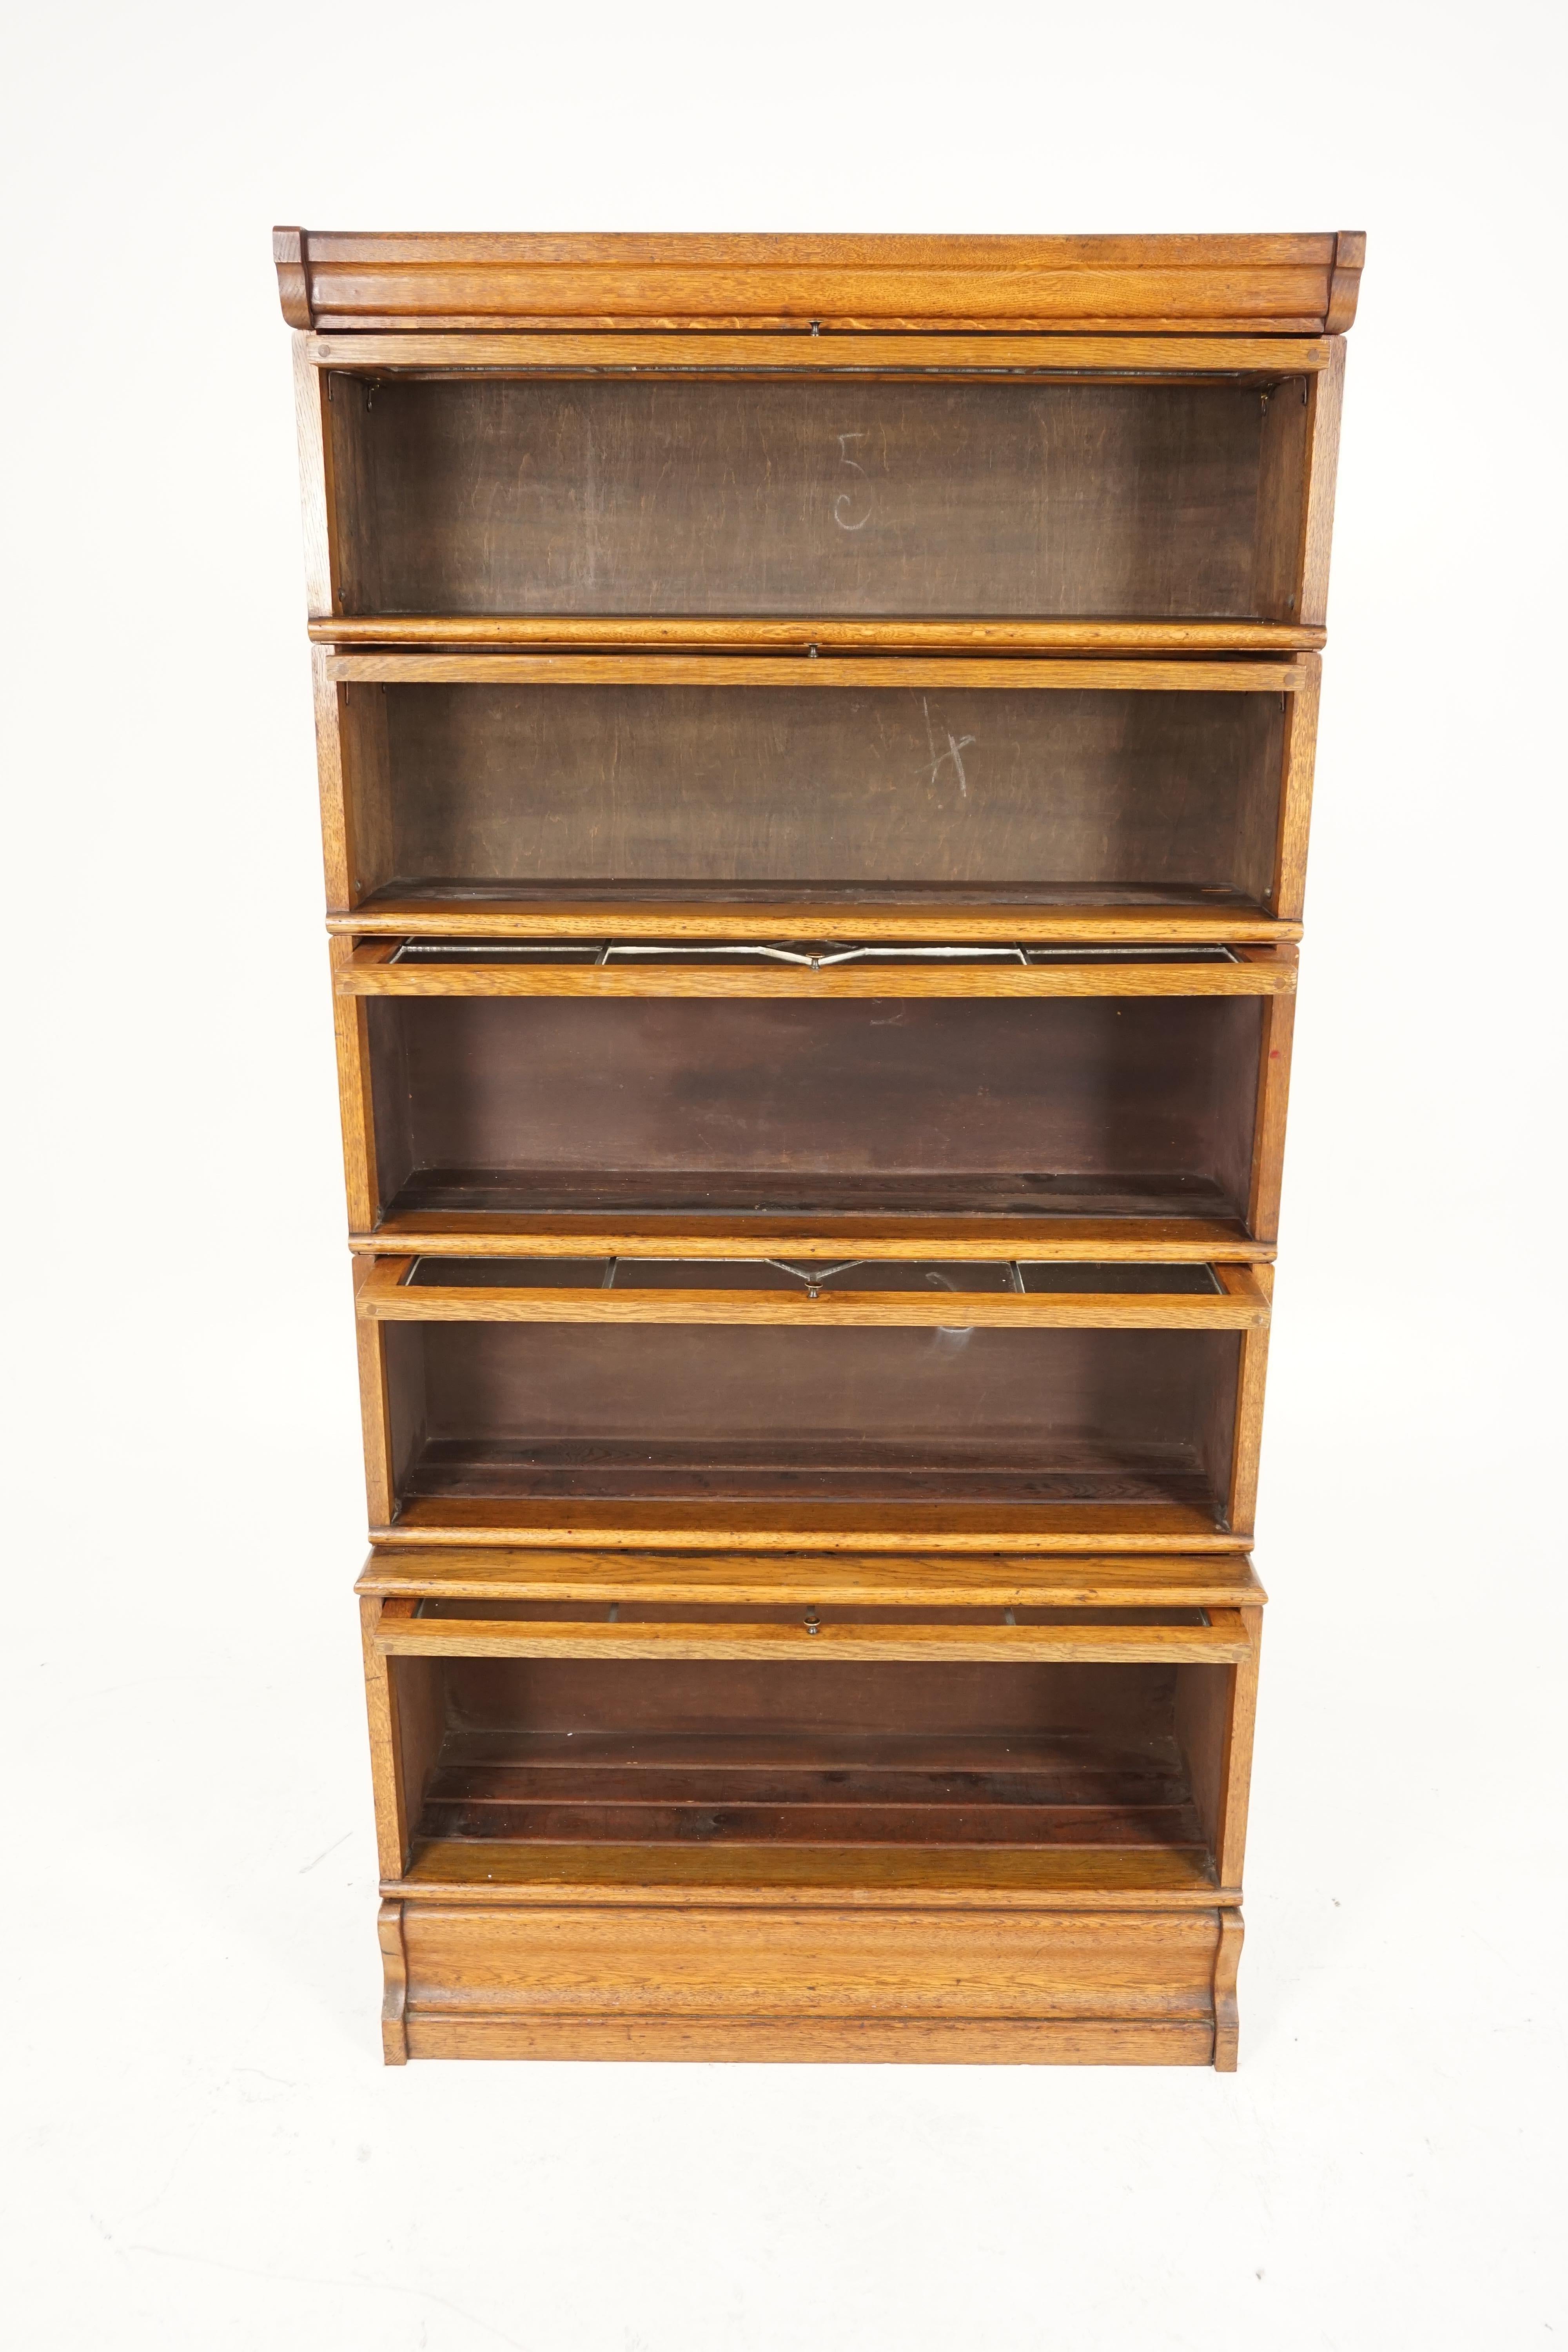 Hand-Crafted Antique Oak Bookcase, 5-Tier Sectional, Leaded Glass, Scotland 1920, B1865